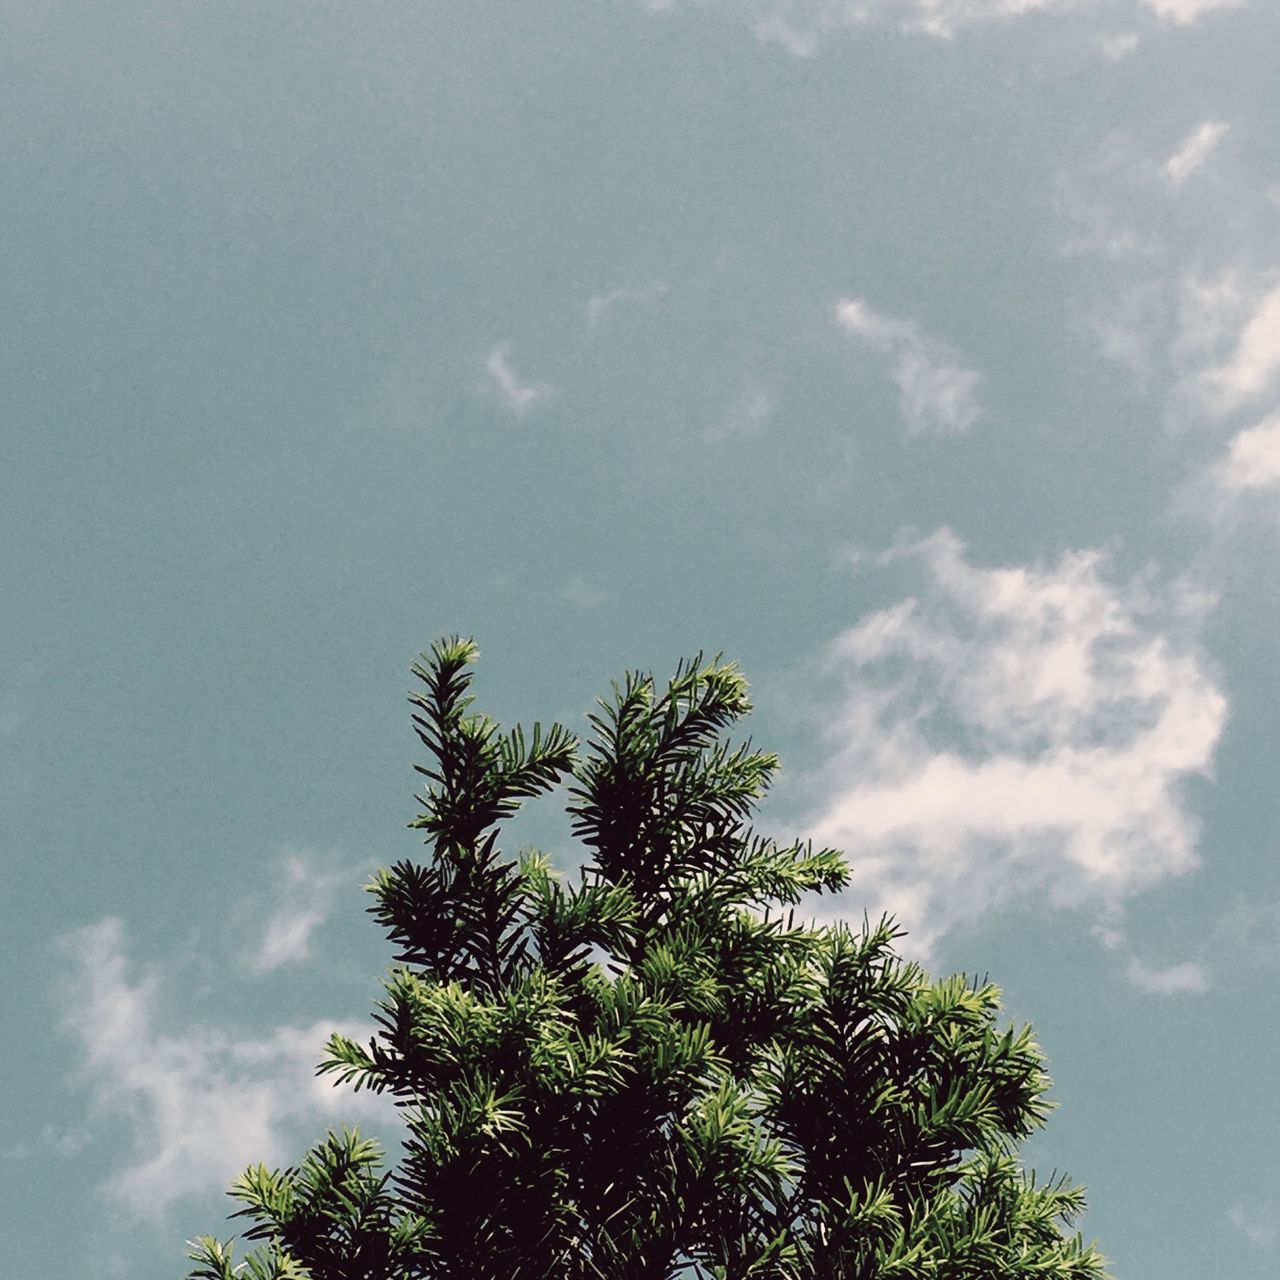 low angle view, tree, sky, growth, cloud - sky, nature, beauty in nature, tranquility, branch, high section, treetop, cloud, blue, scenics, cloudy, day, green color, outdoors, tranquil scene, no people